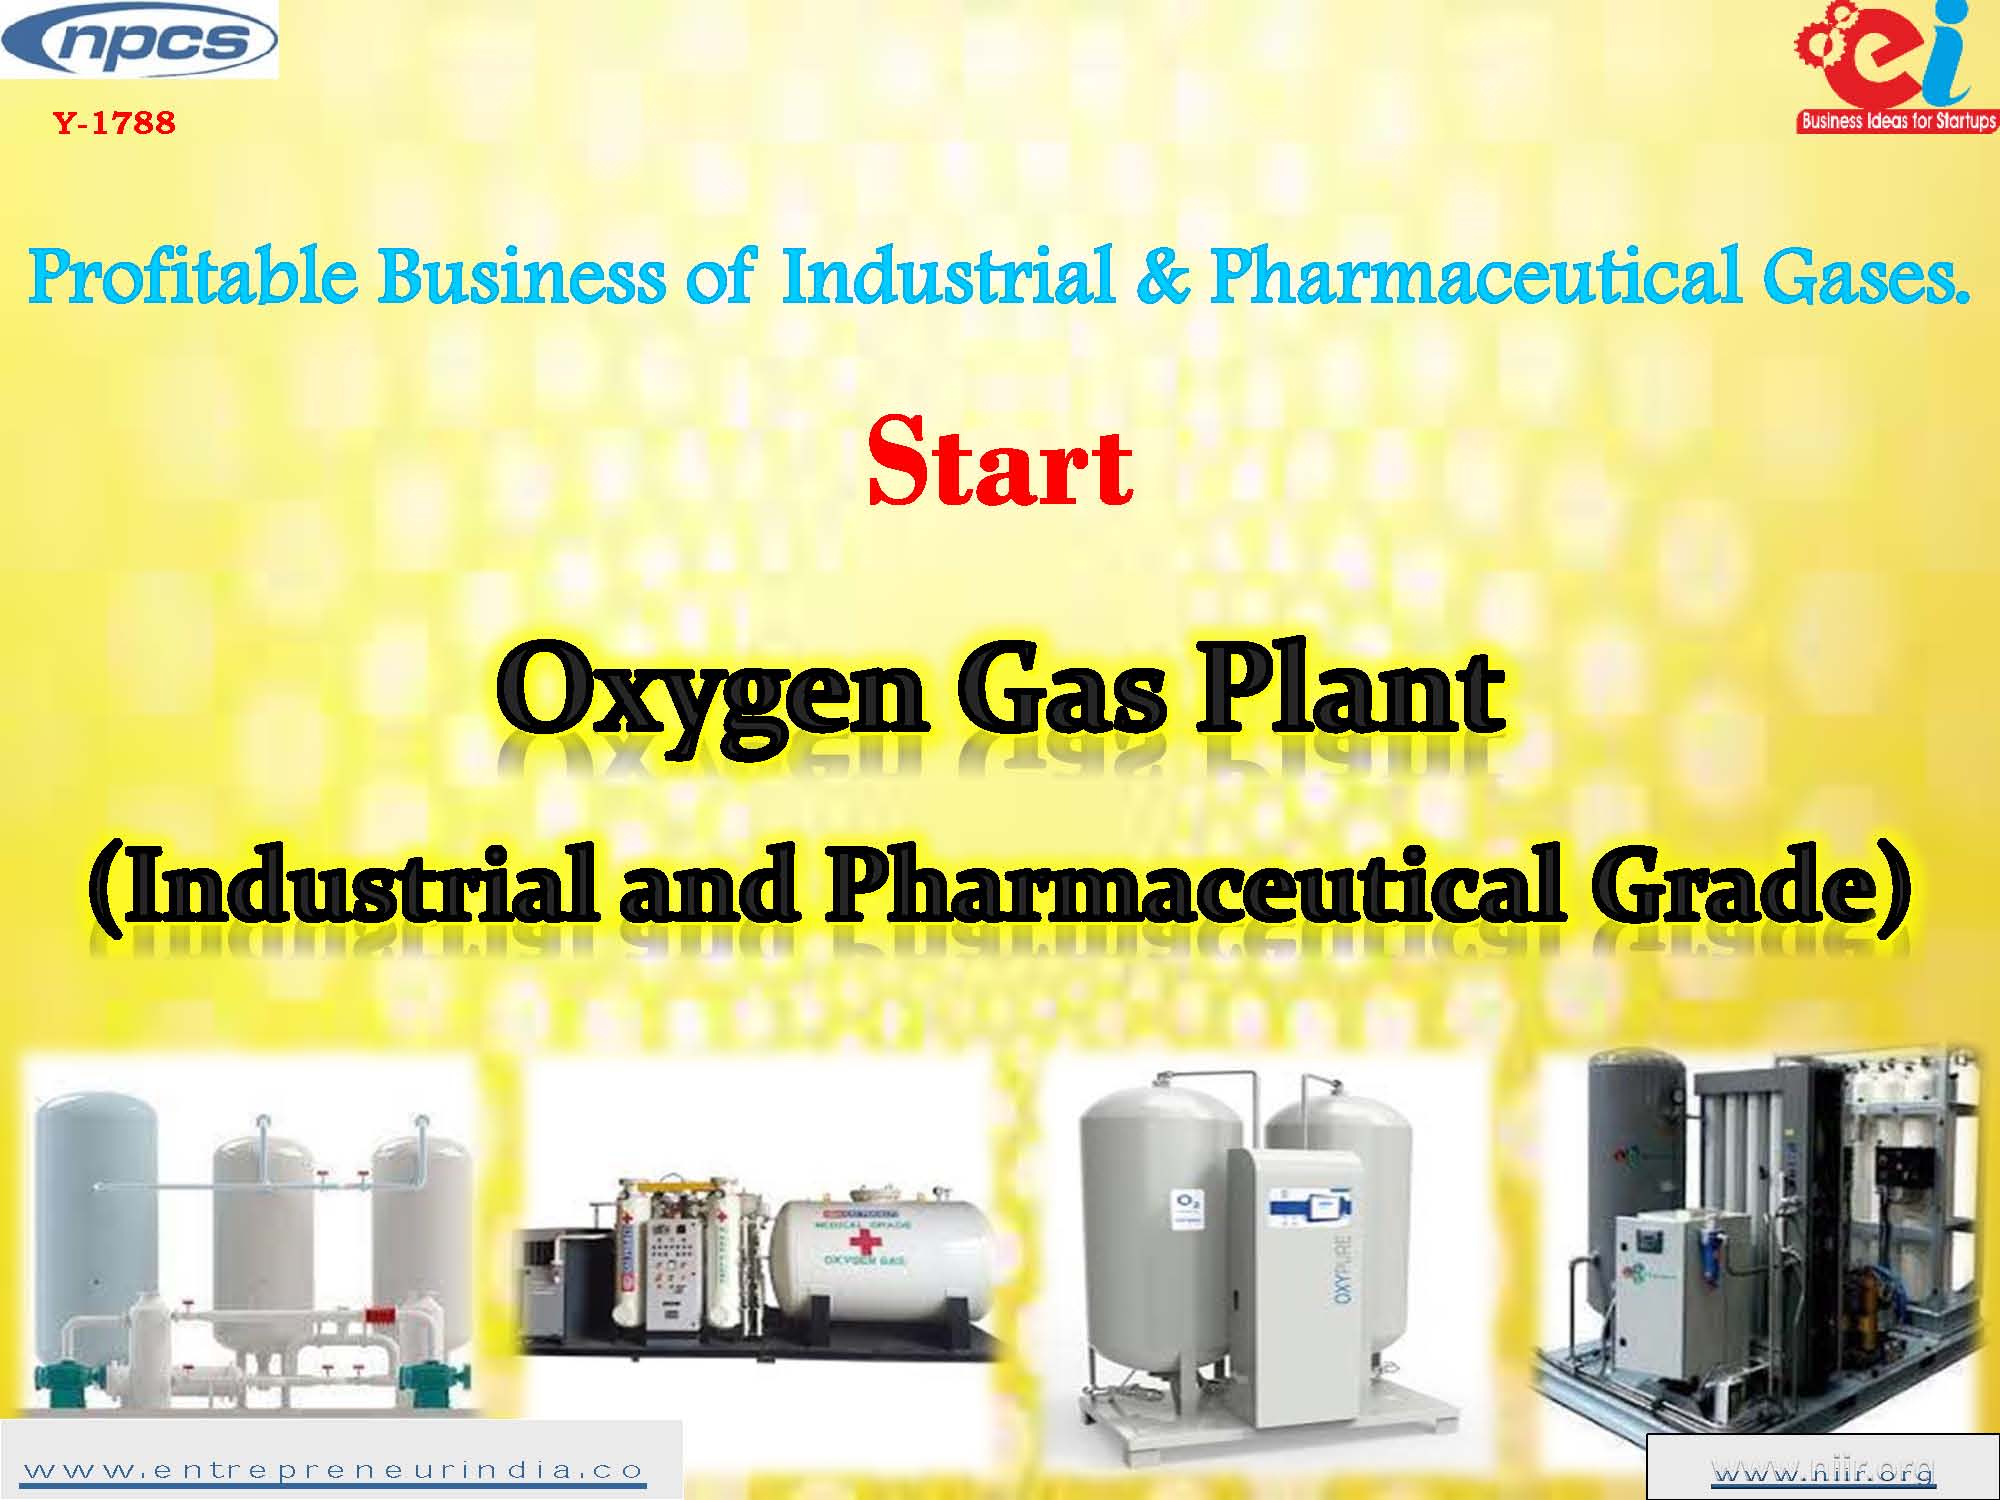 Profitable Business of Industrial and Pharmaceutical Gases Start Oxygen Gas Plant Industrial and Pharmaceutical Grade